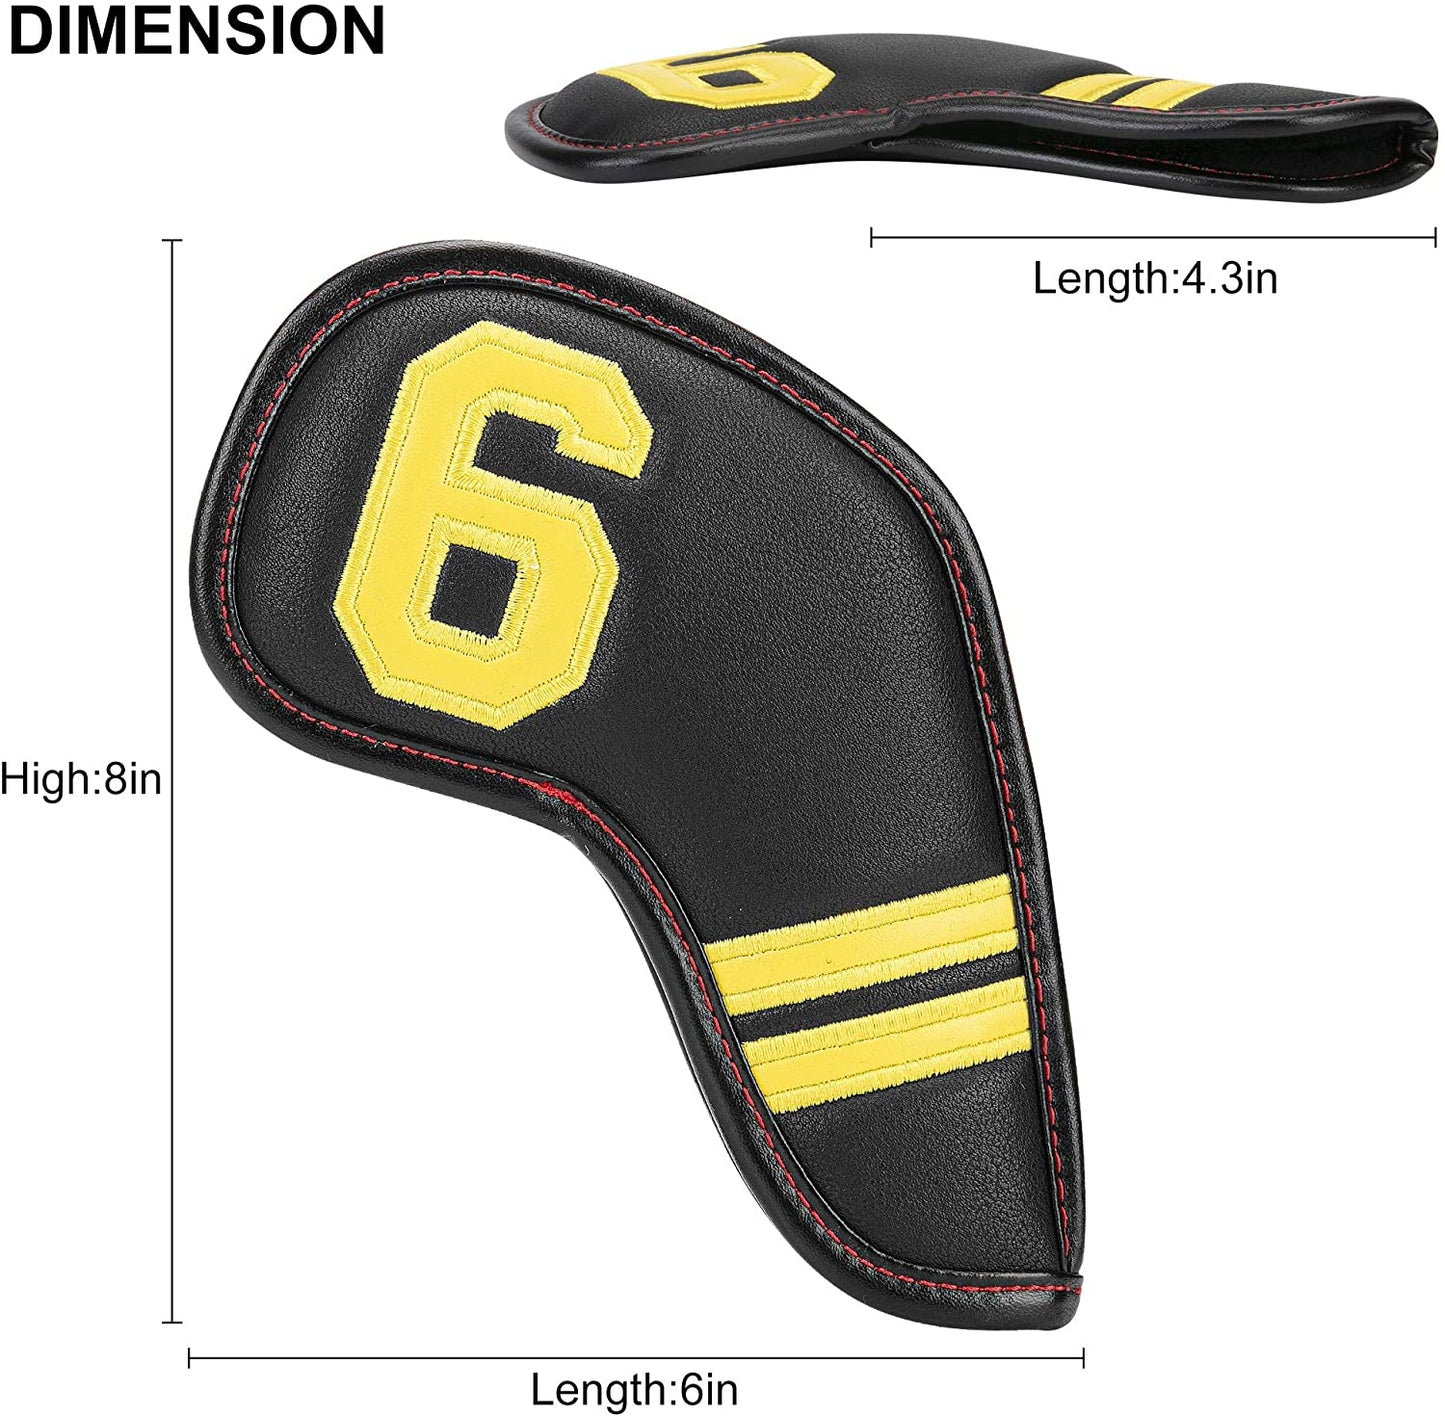 Golf Iron Head Covers 11pcs Thicken PU Leather Soft Color Number Embroidery Edging Closely Protector Right Handed Waterproof Fit Most Brands （4-9 Pw Aw Sw Lw X） Number